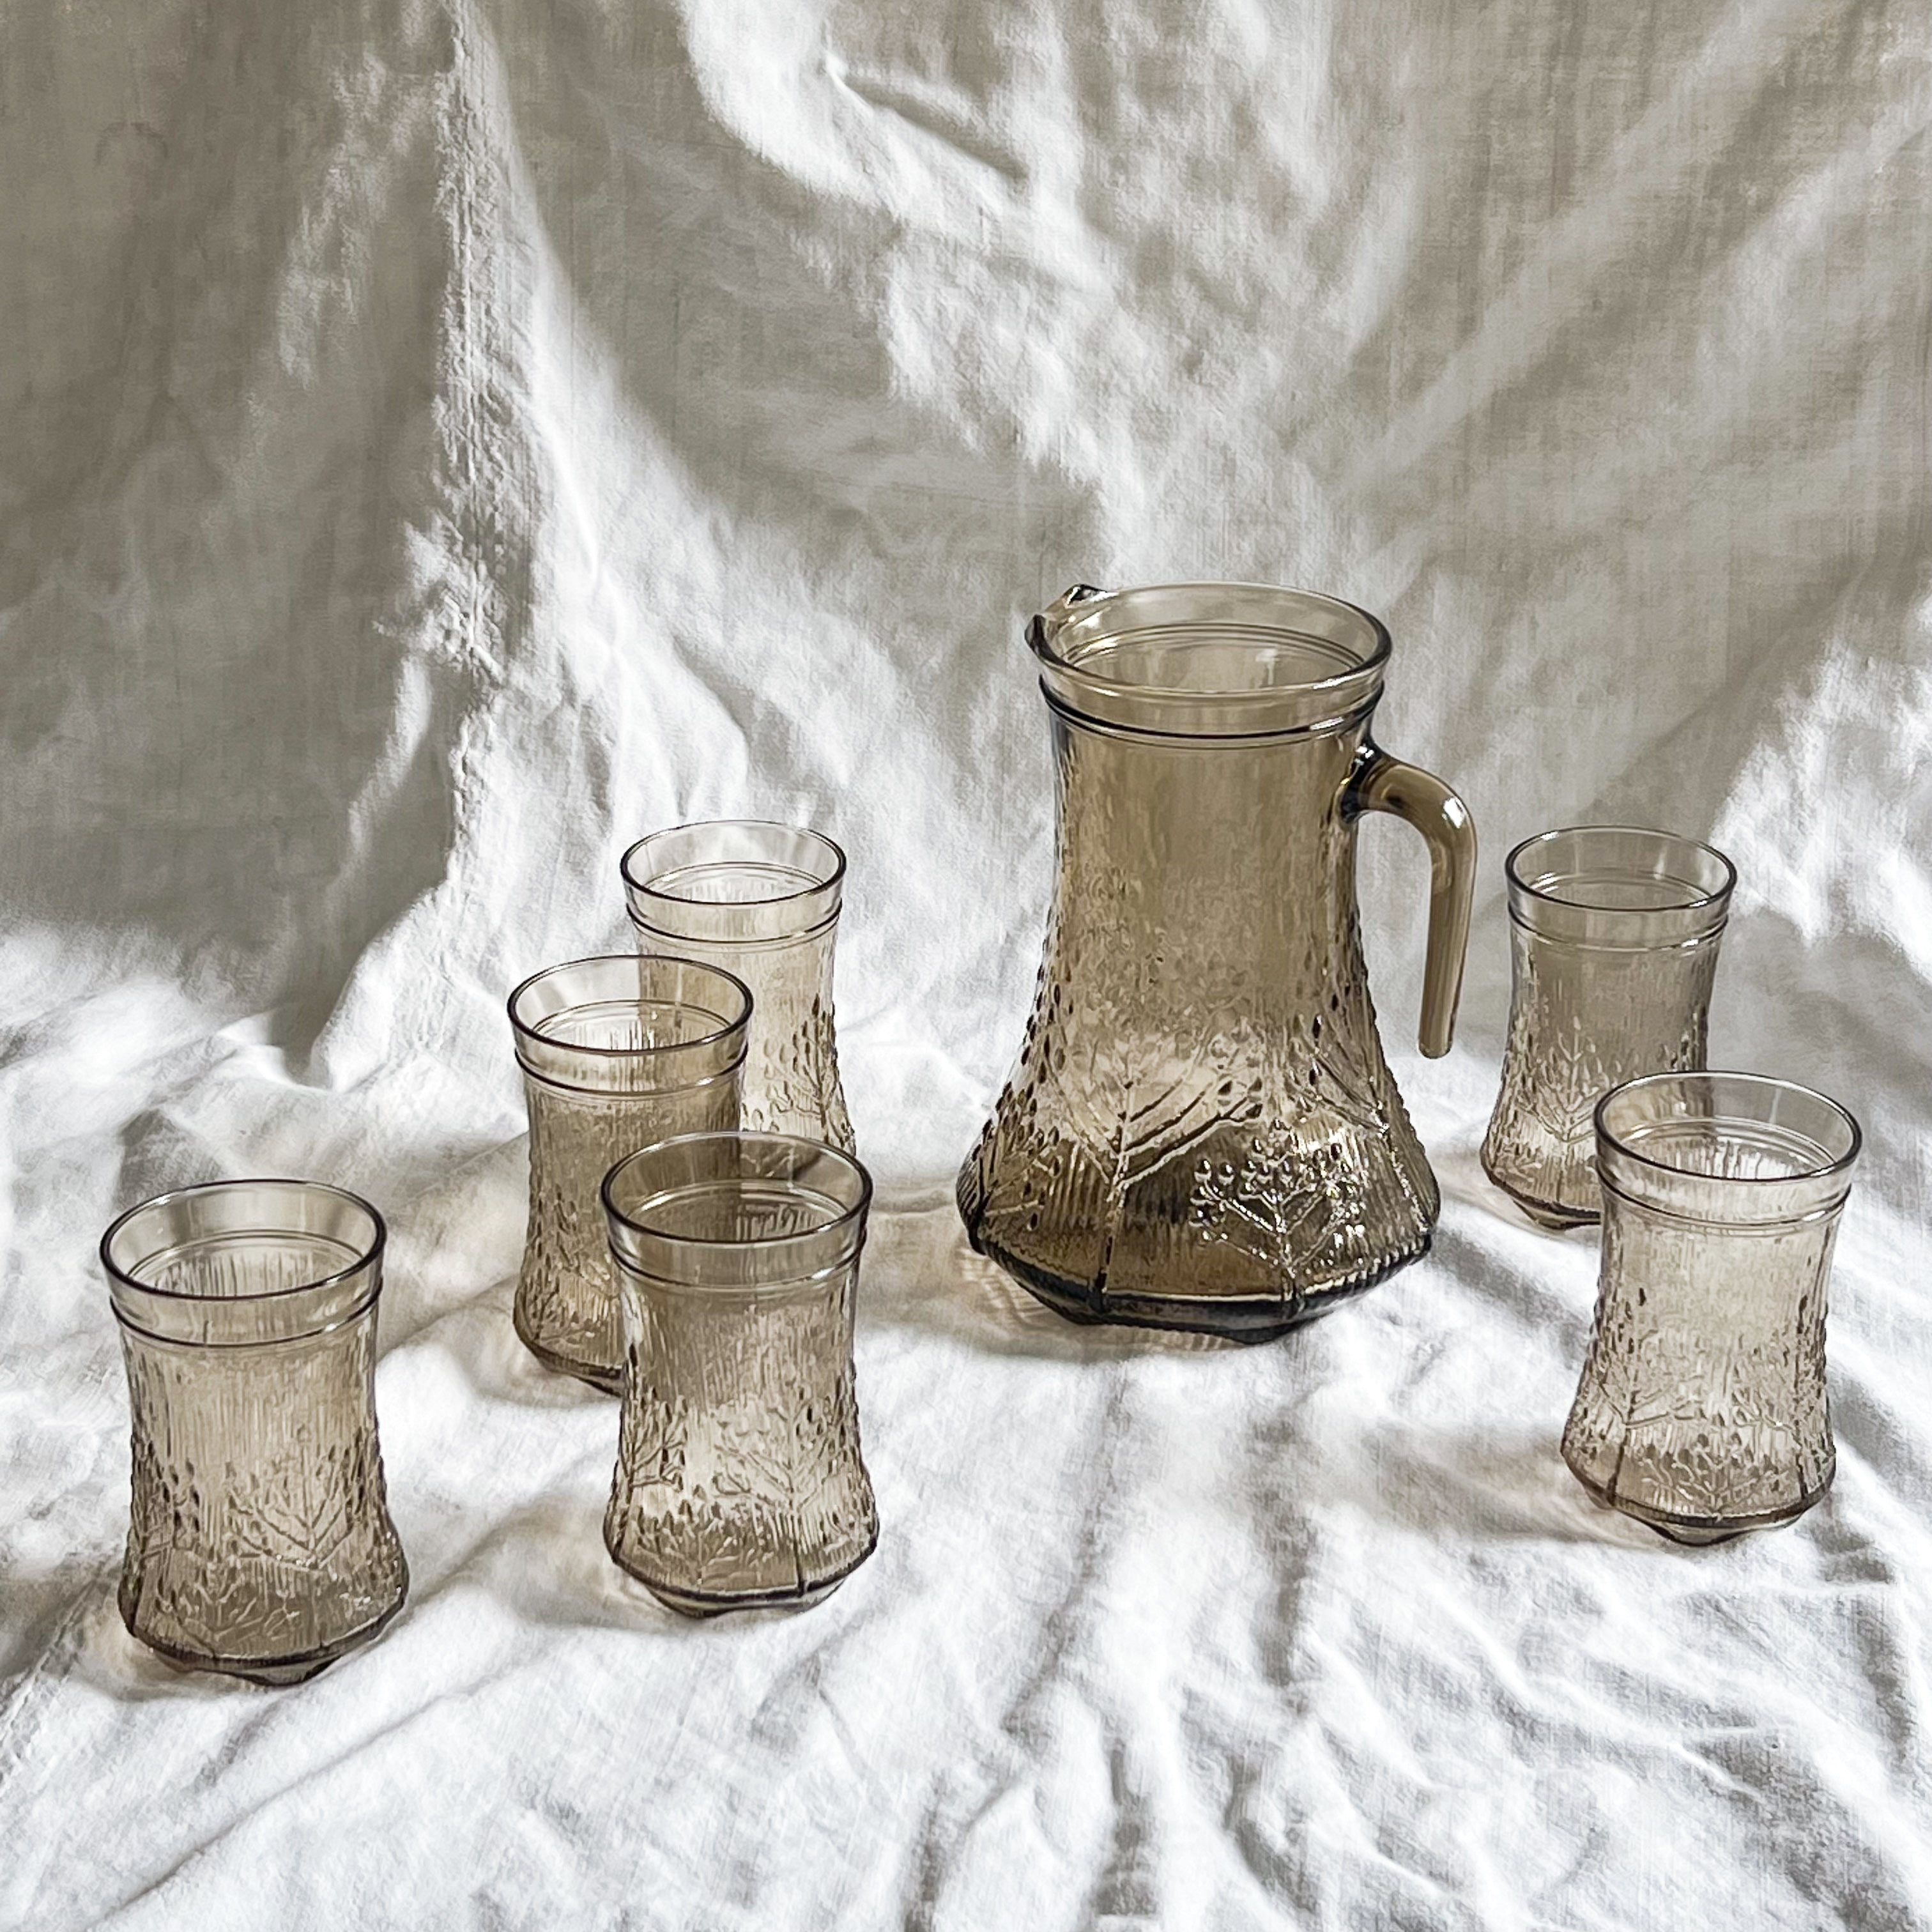 Finnish Pitcher and Glasses